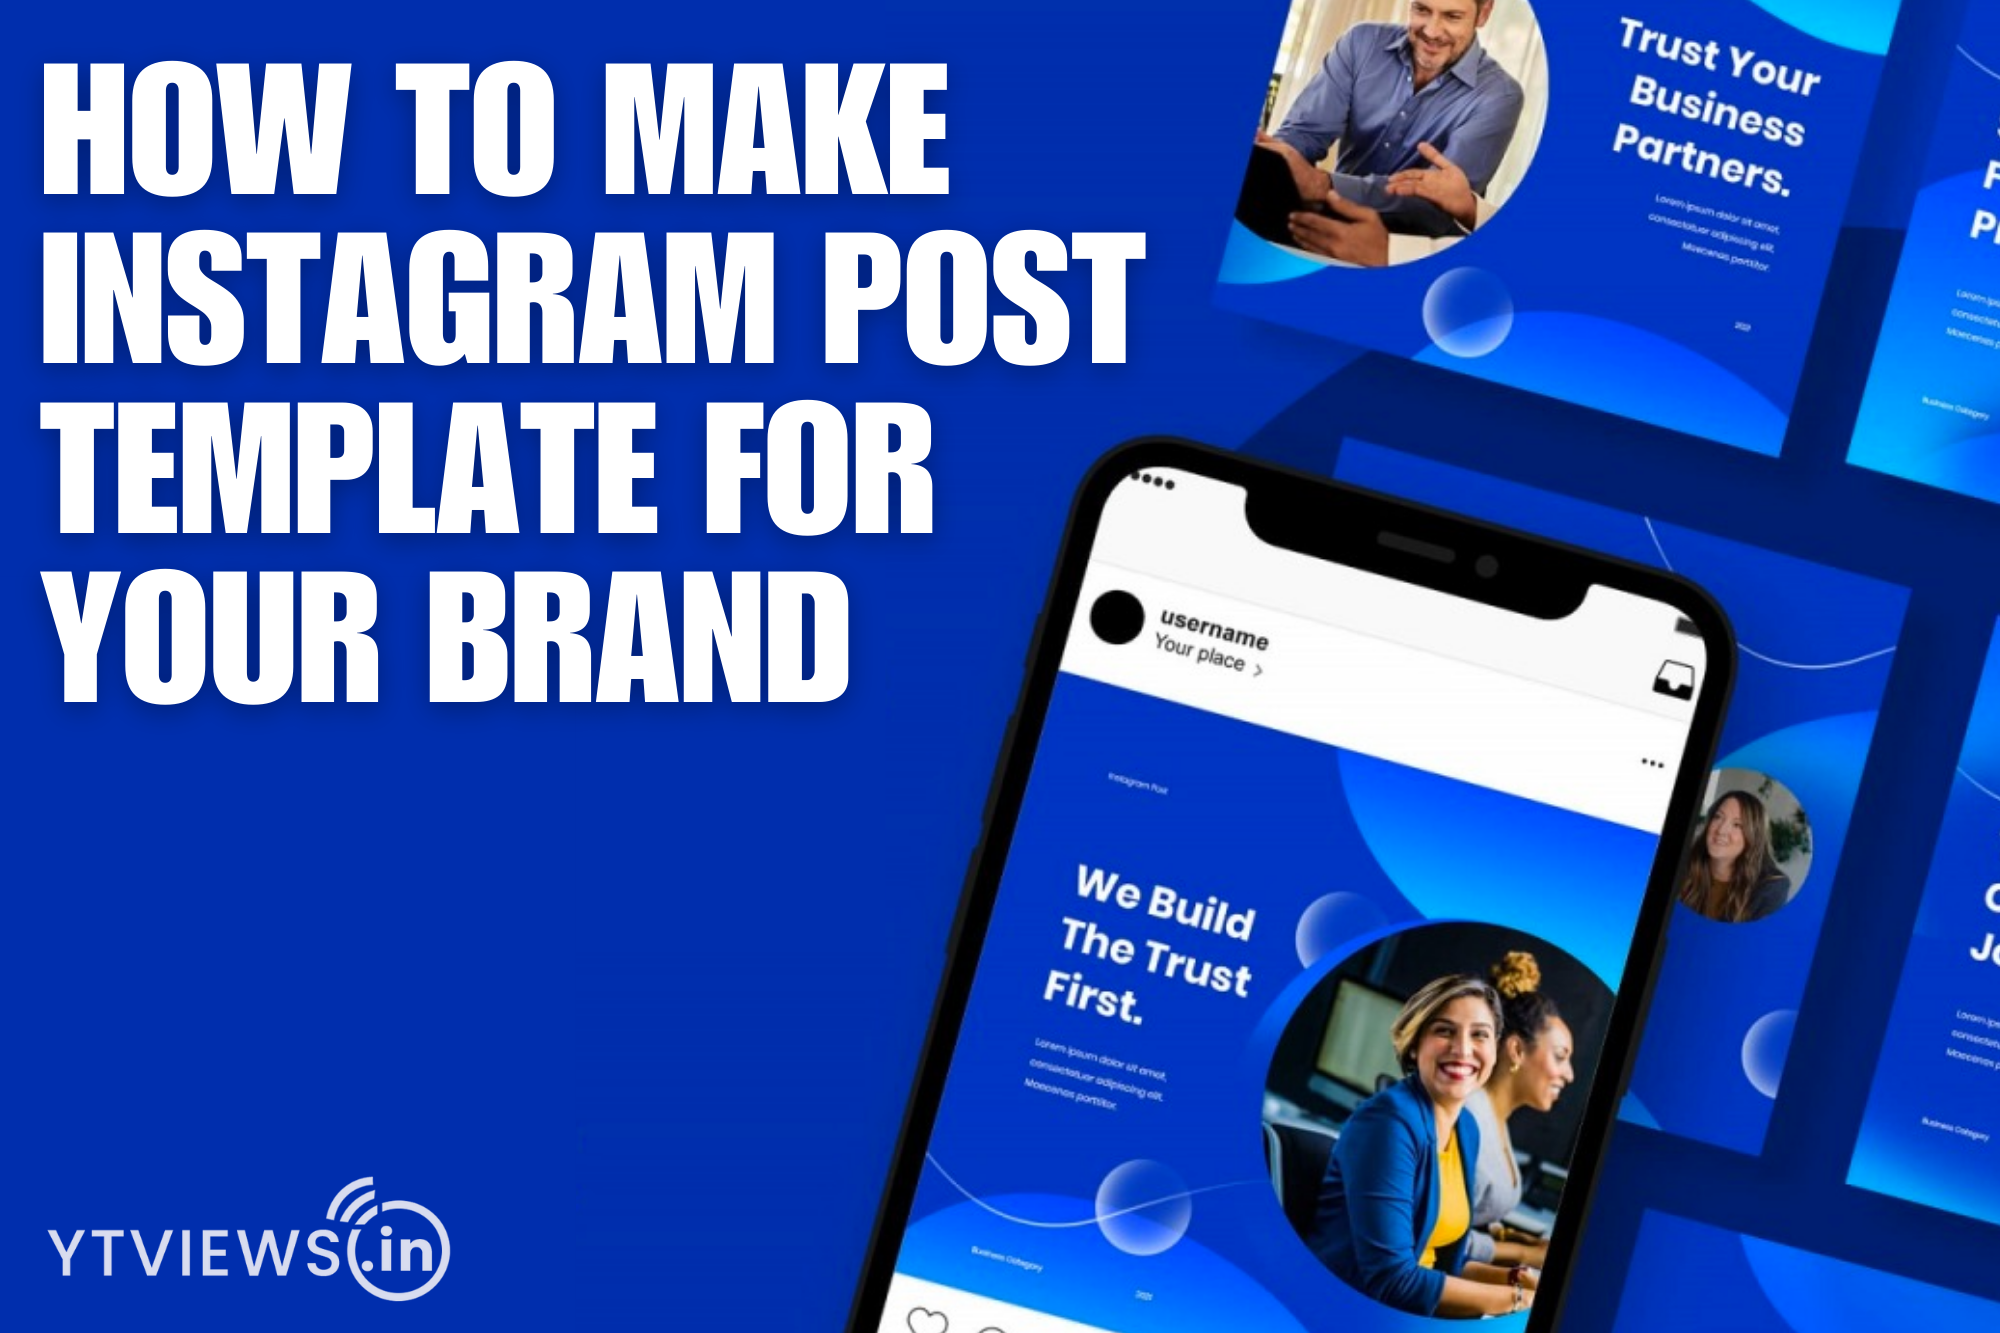 How to make Instagram post template for your brand